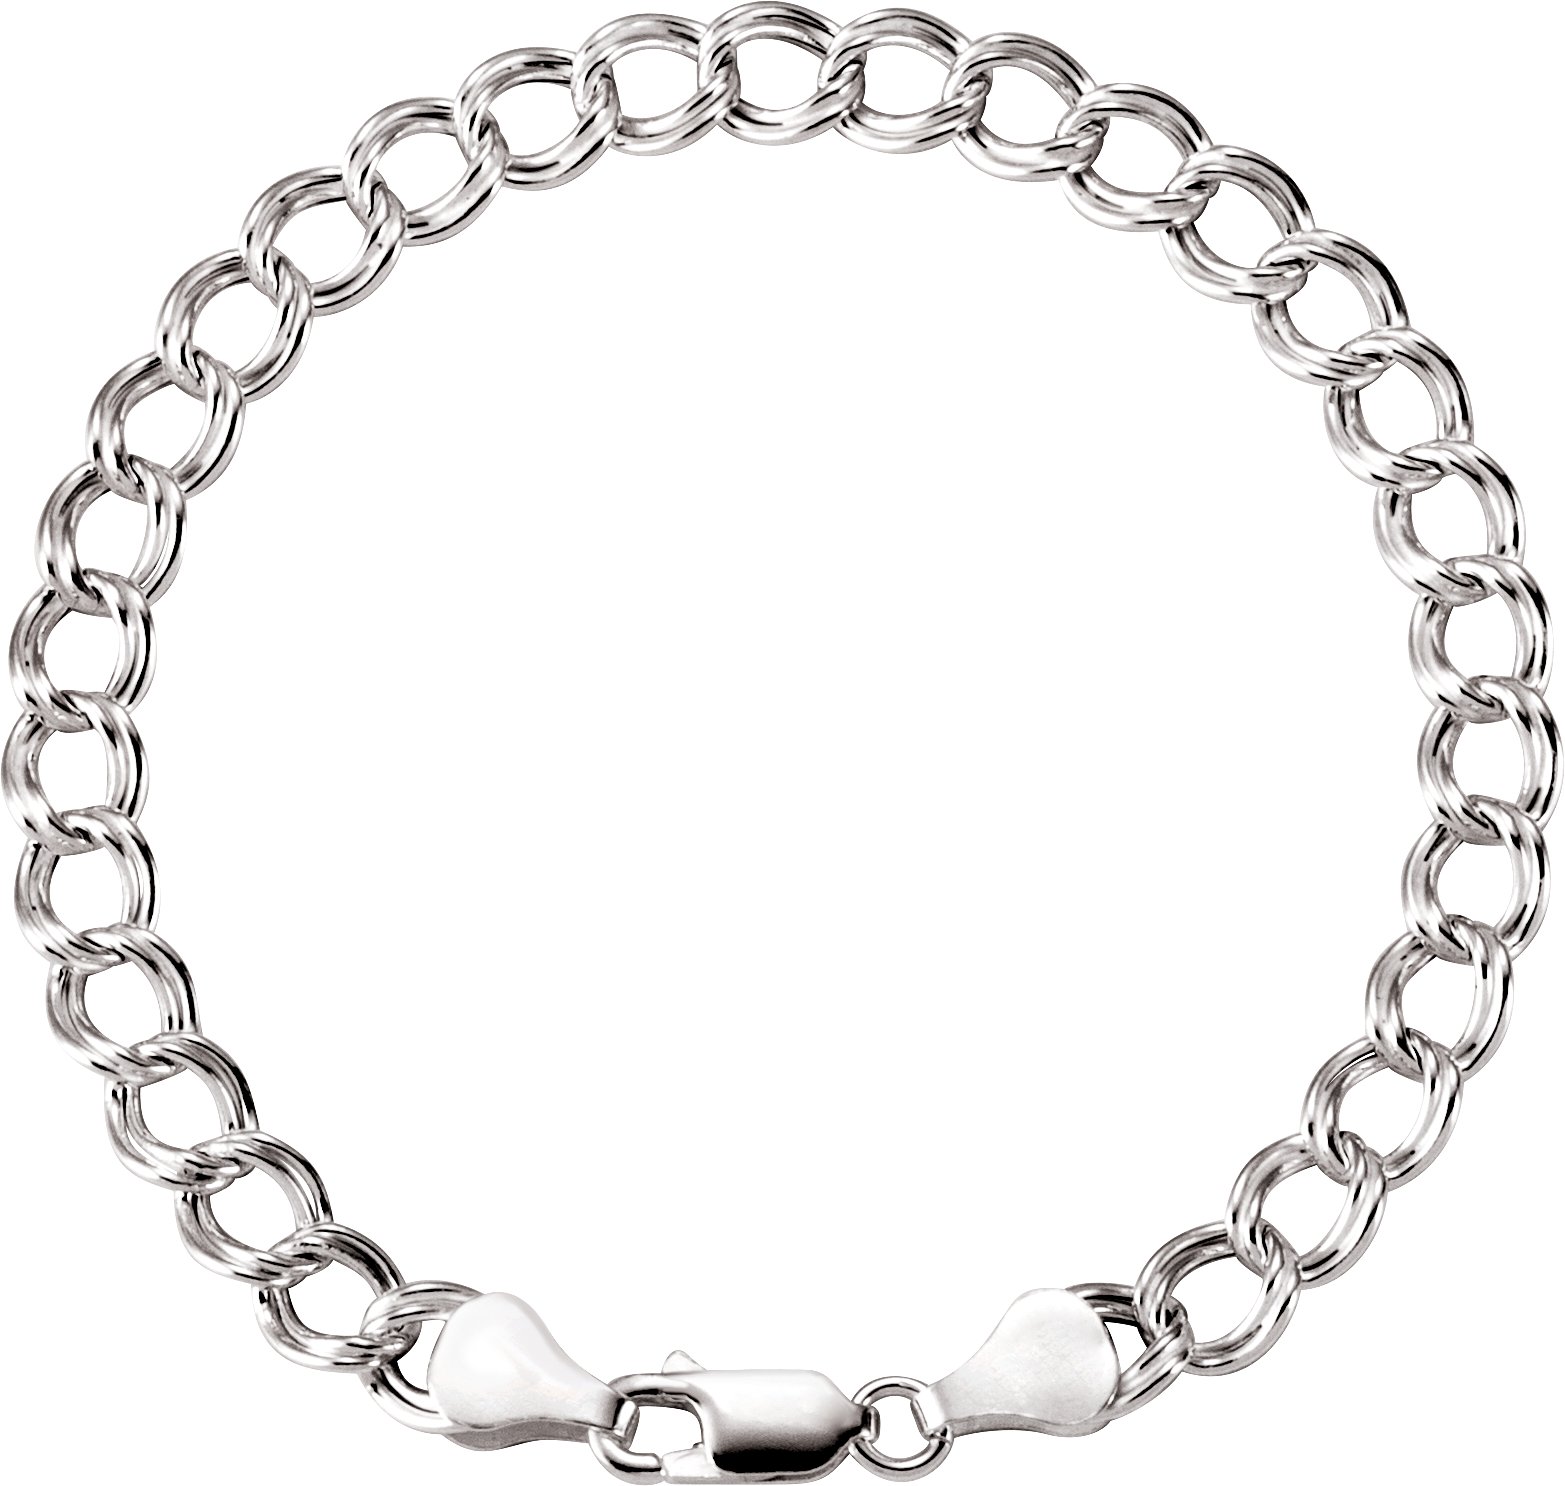 5.5mm Sterling Silver Paralleo Charm Bracelet 7 inch Ref 947463